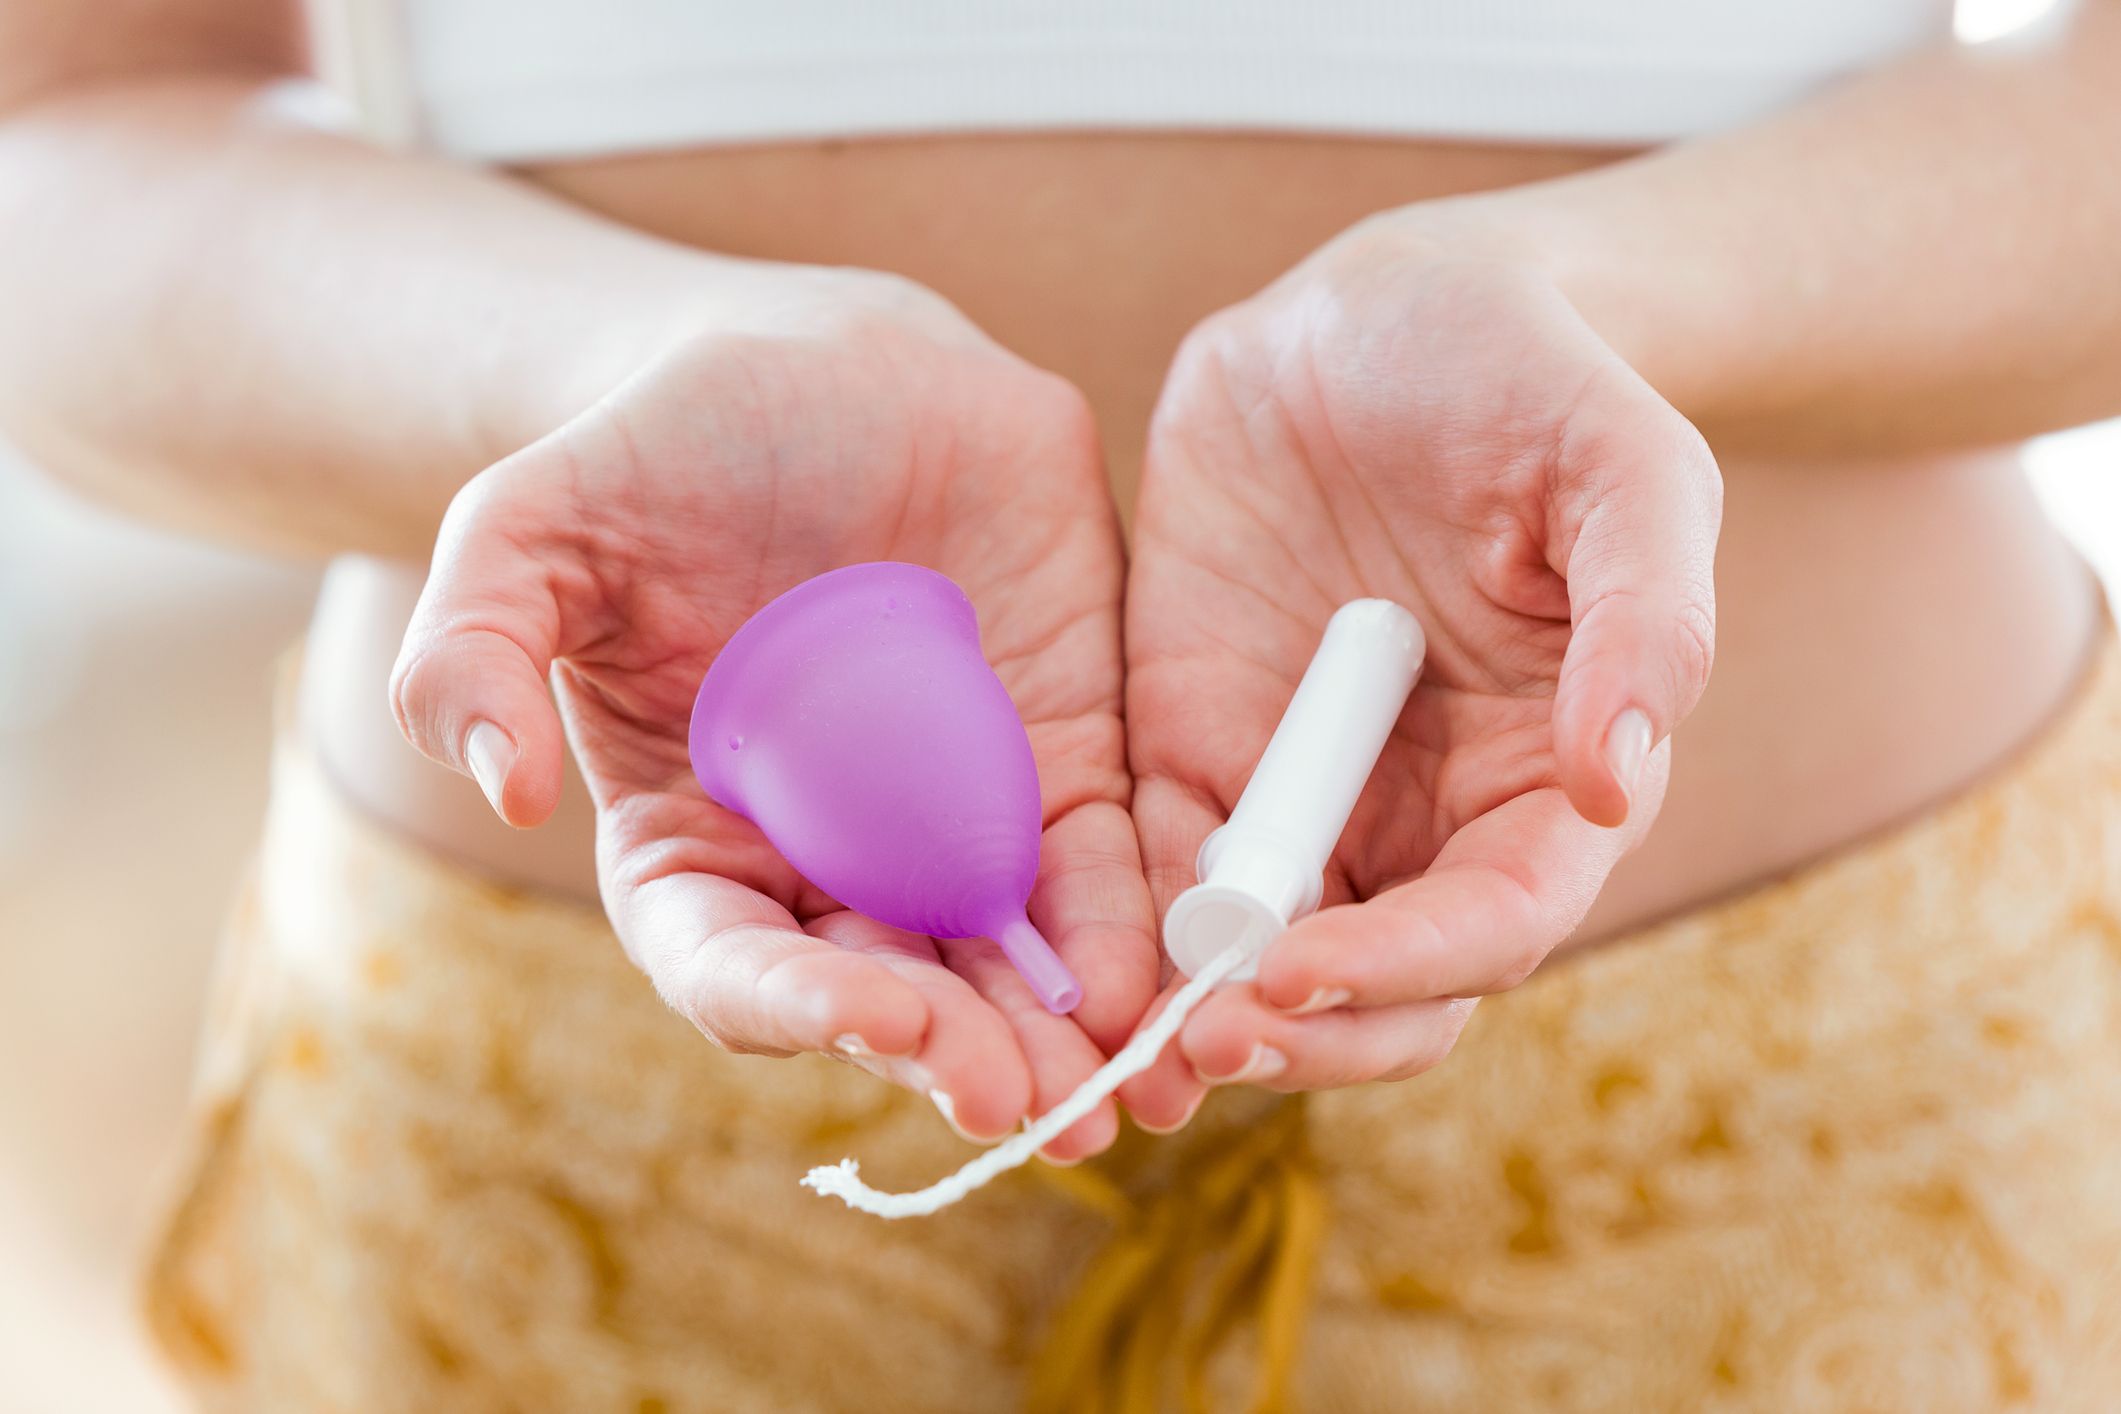 What Is a Menstrual - to Use a Menstrual